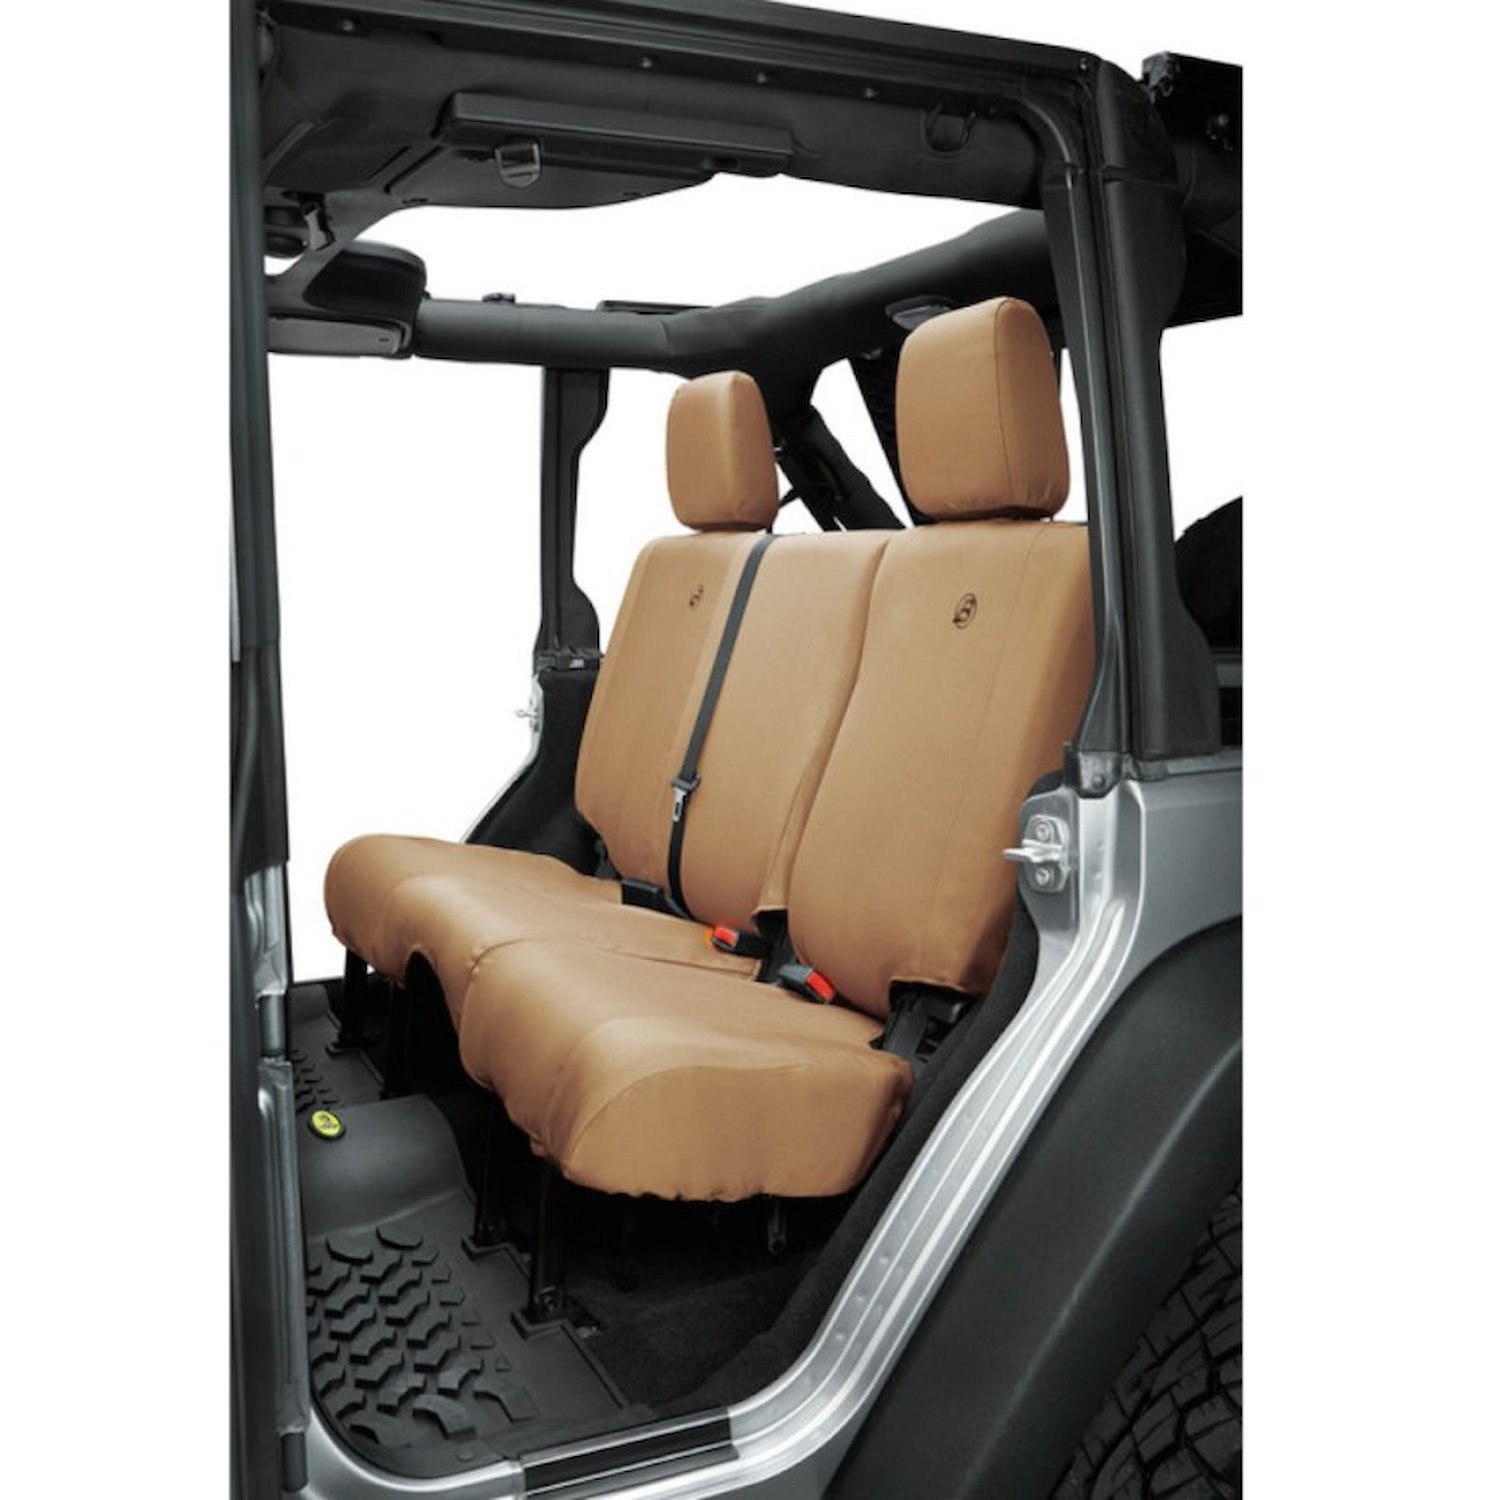 Seat Covers, Tan, Fits Factory Seats w/o Fold Down Arm Rests, Sold Individually,